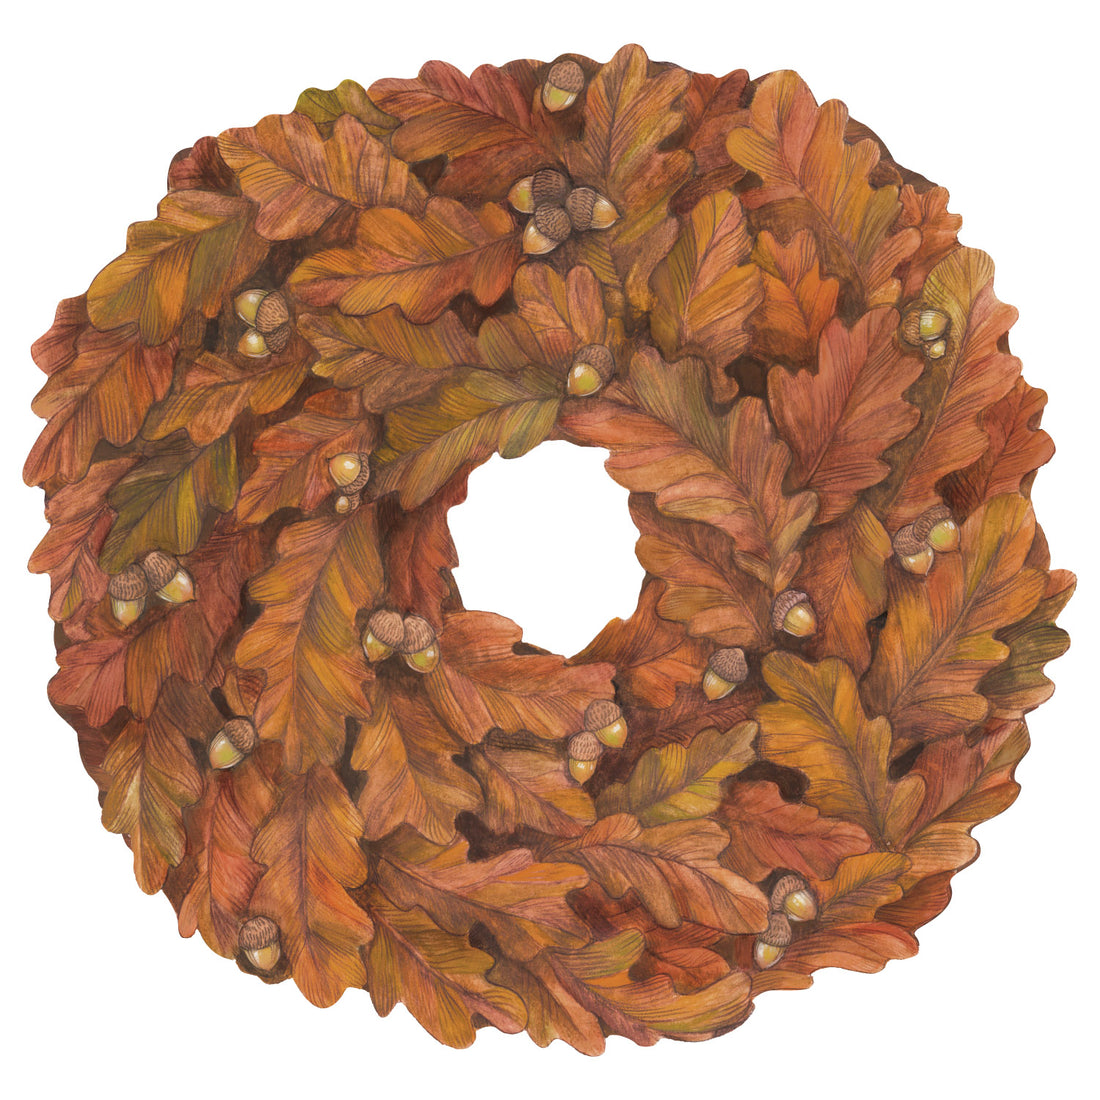 An illustrated, dense wreath of brown and orange oak leaves and acorns, with a white space in the center.